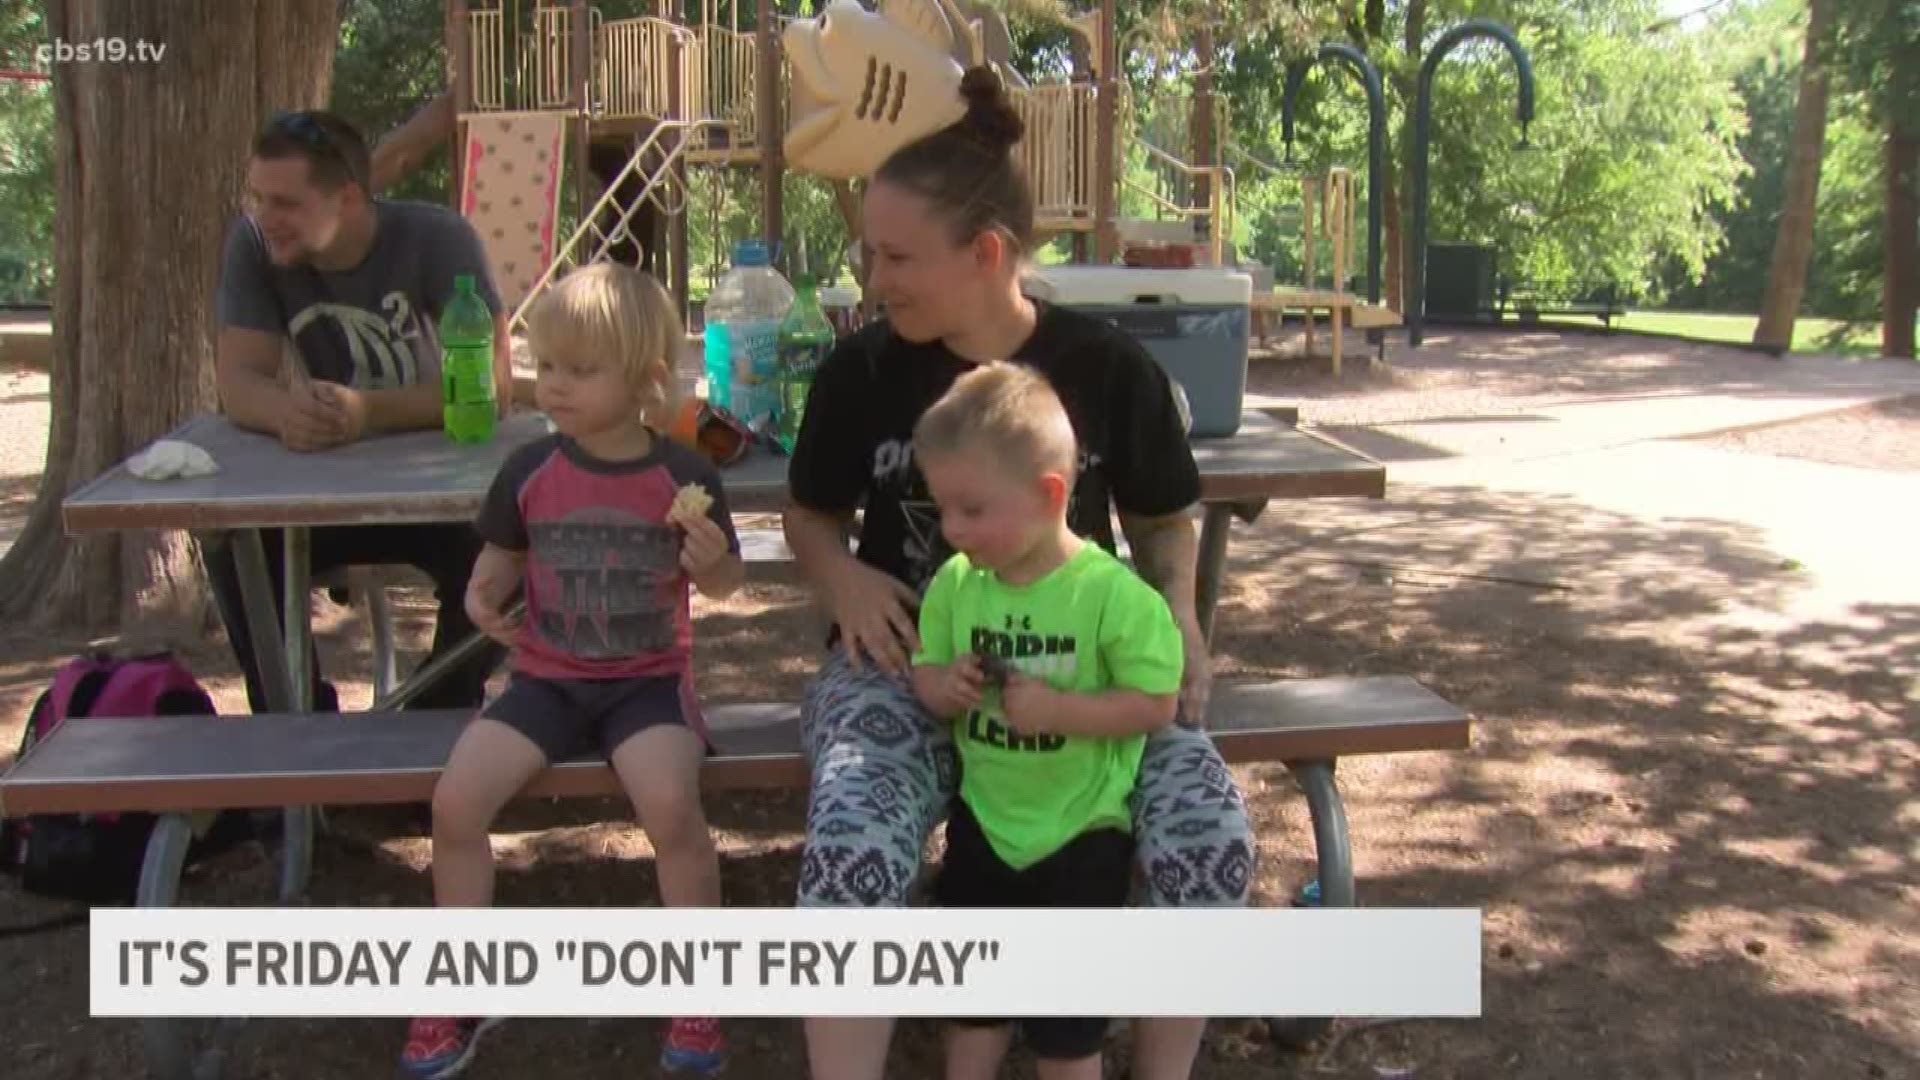 Don't Fry Day cbs19.tv